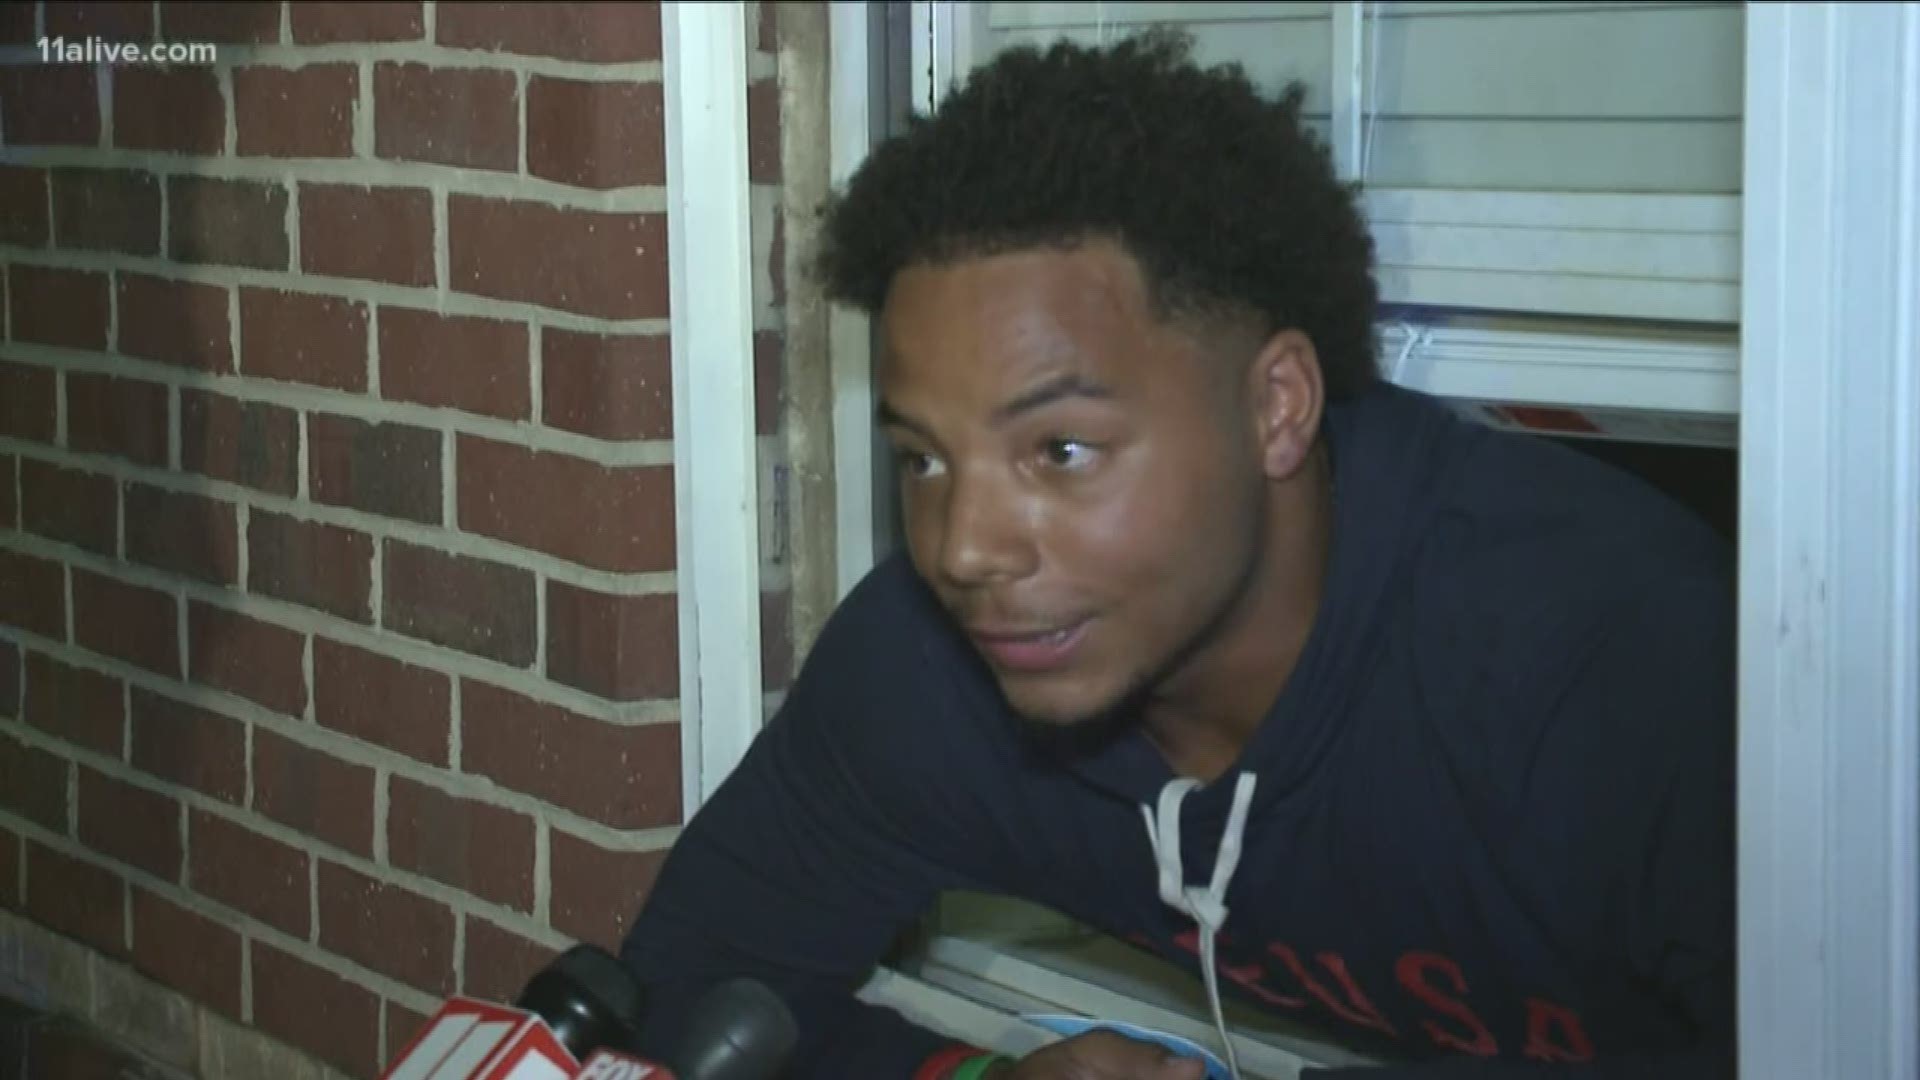 Here's what one student at Clark Atlanta University had to say about the gunfire.